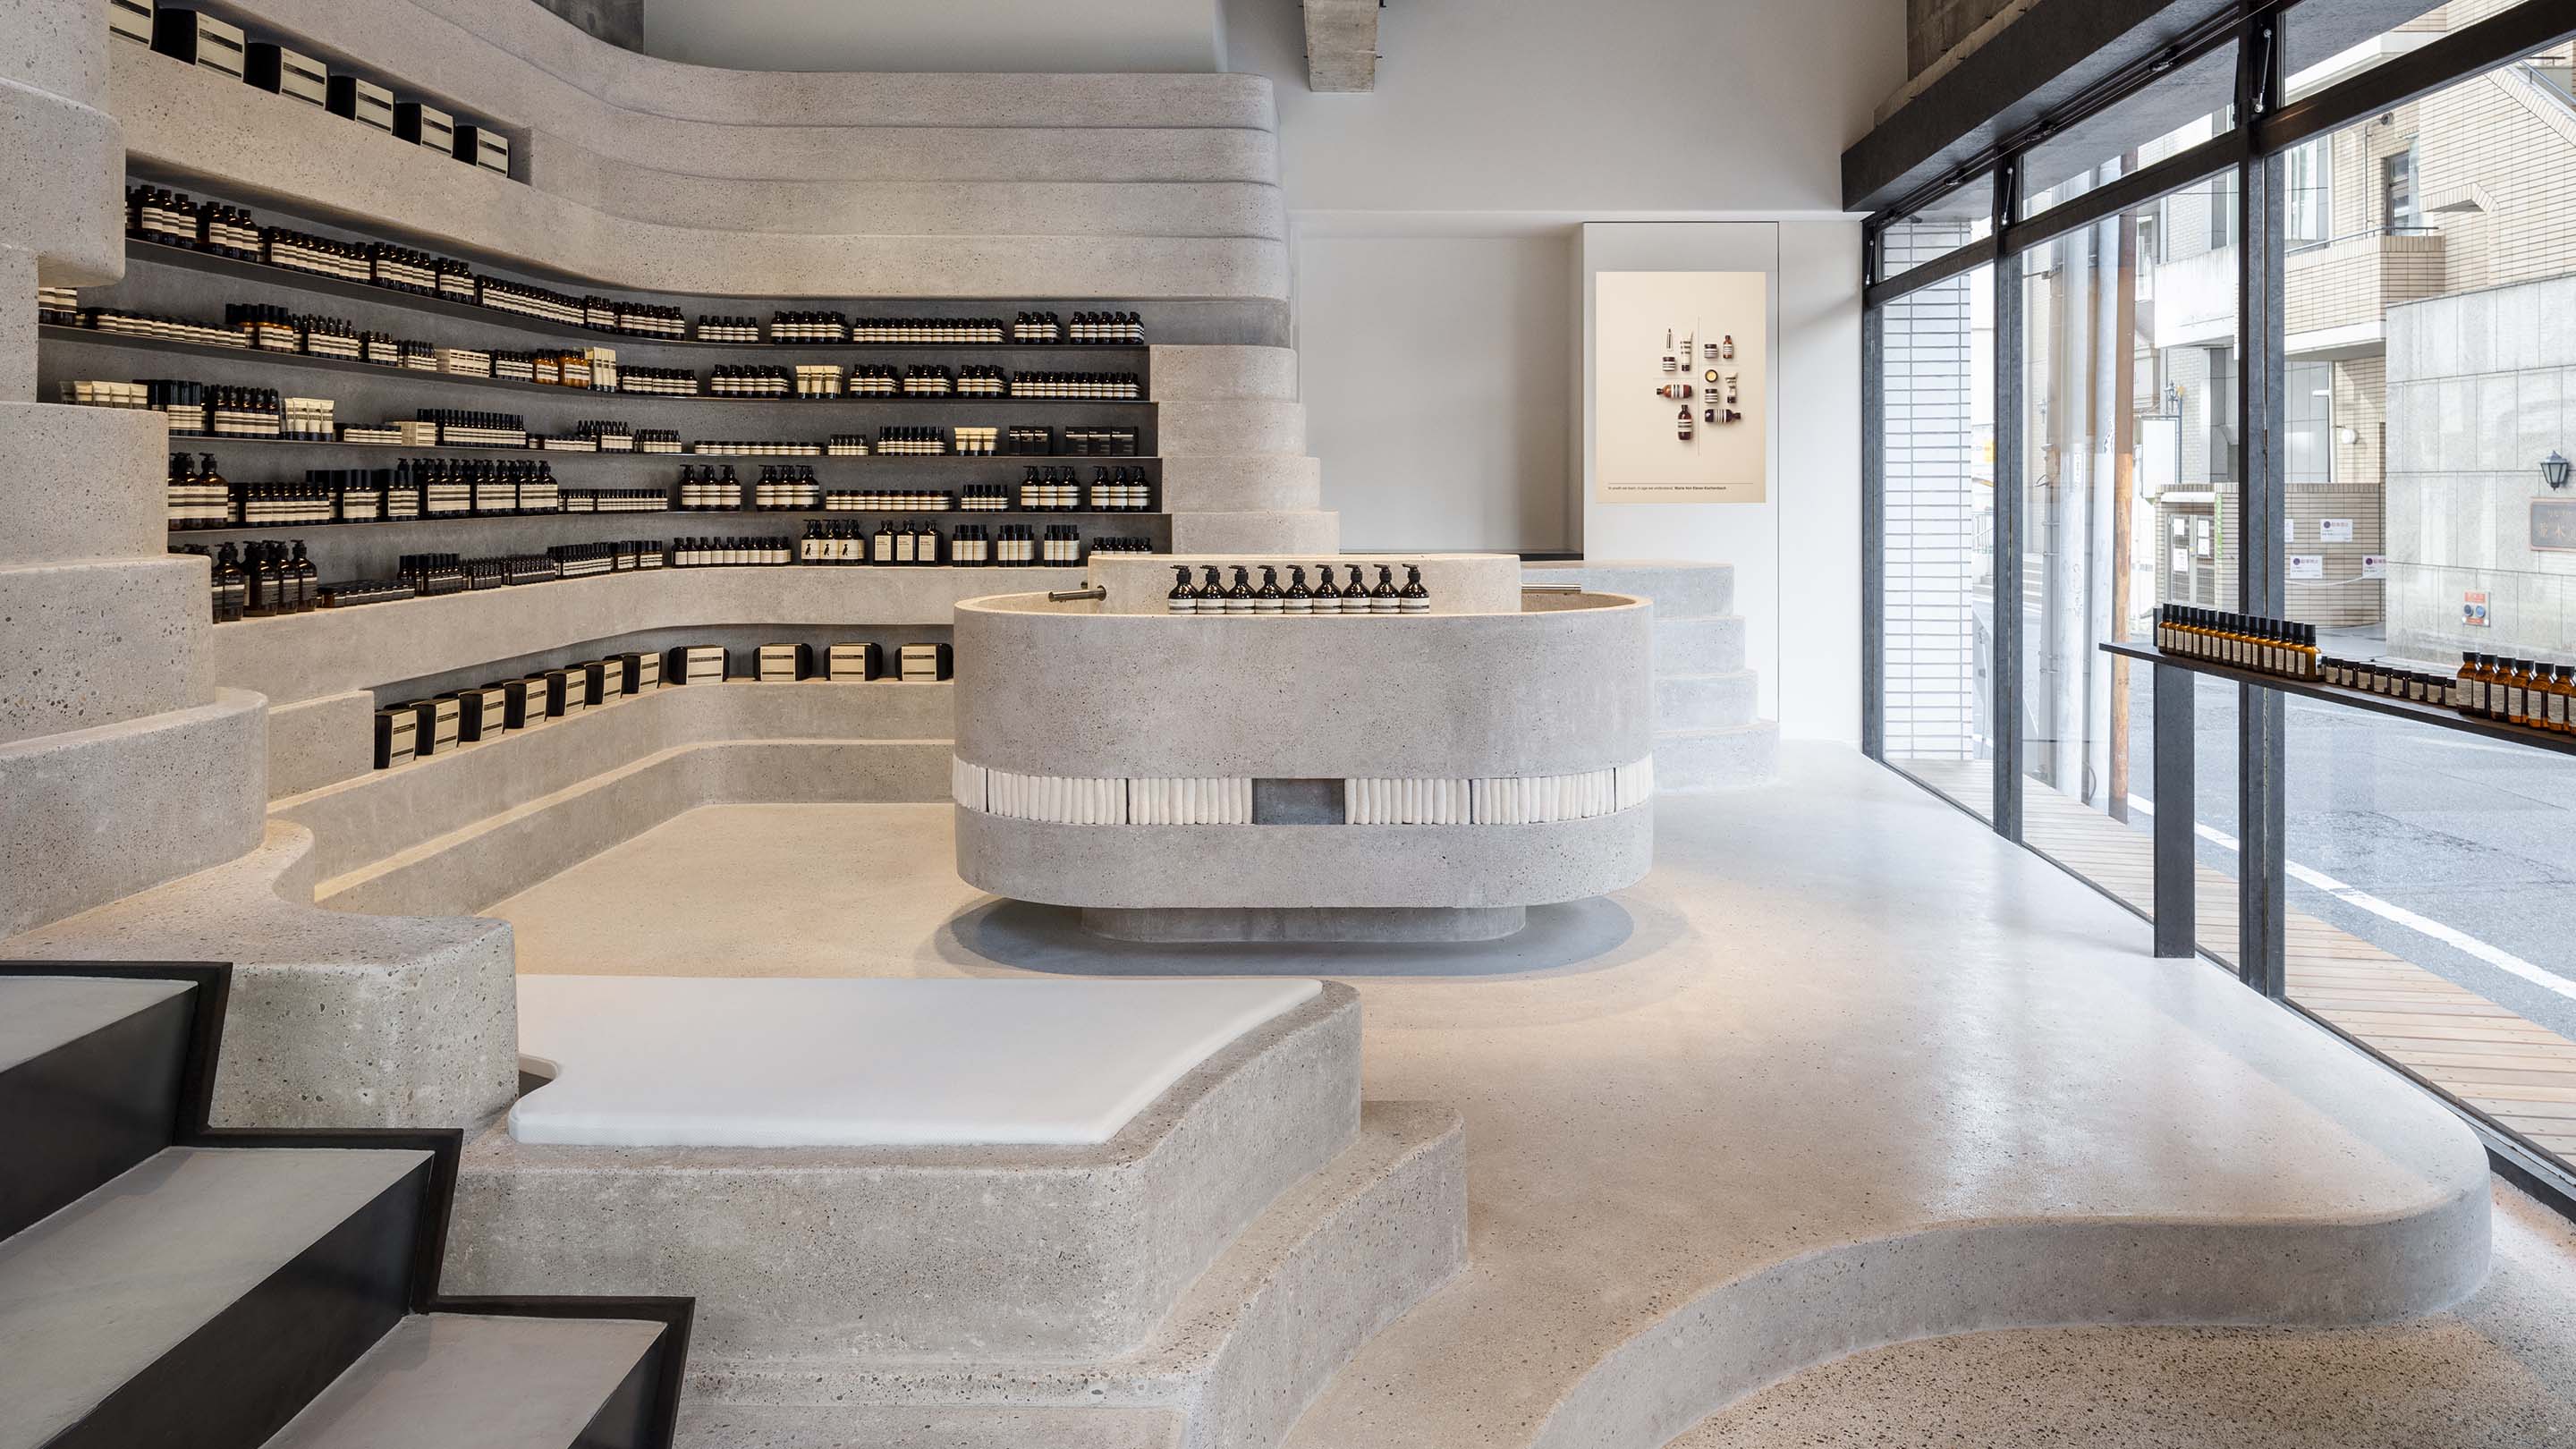 Aesop Hiroshima store interior design with concrete walls, floor, counter and stairs